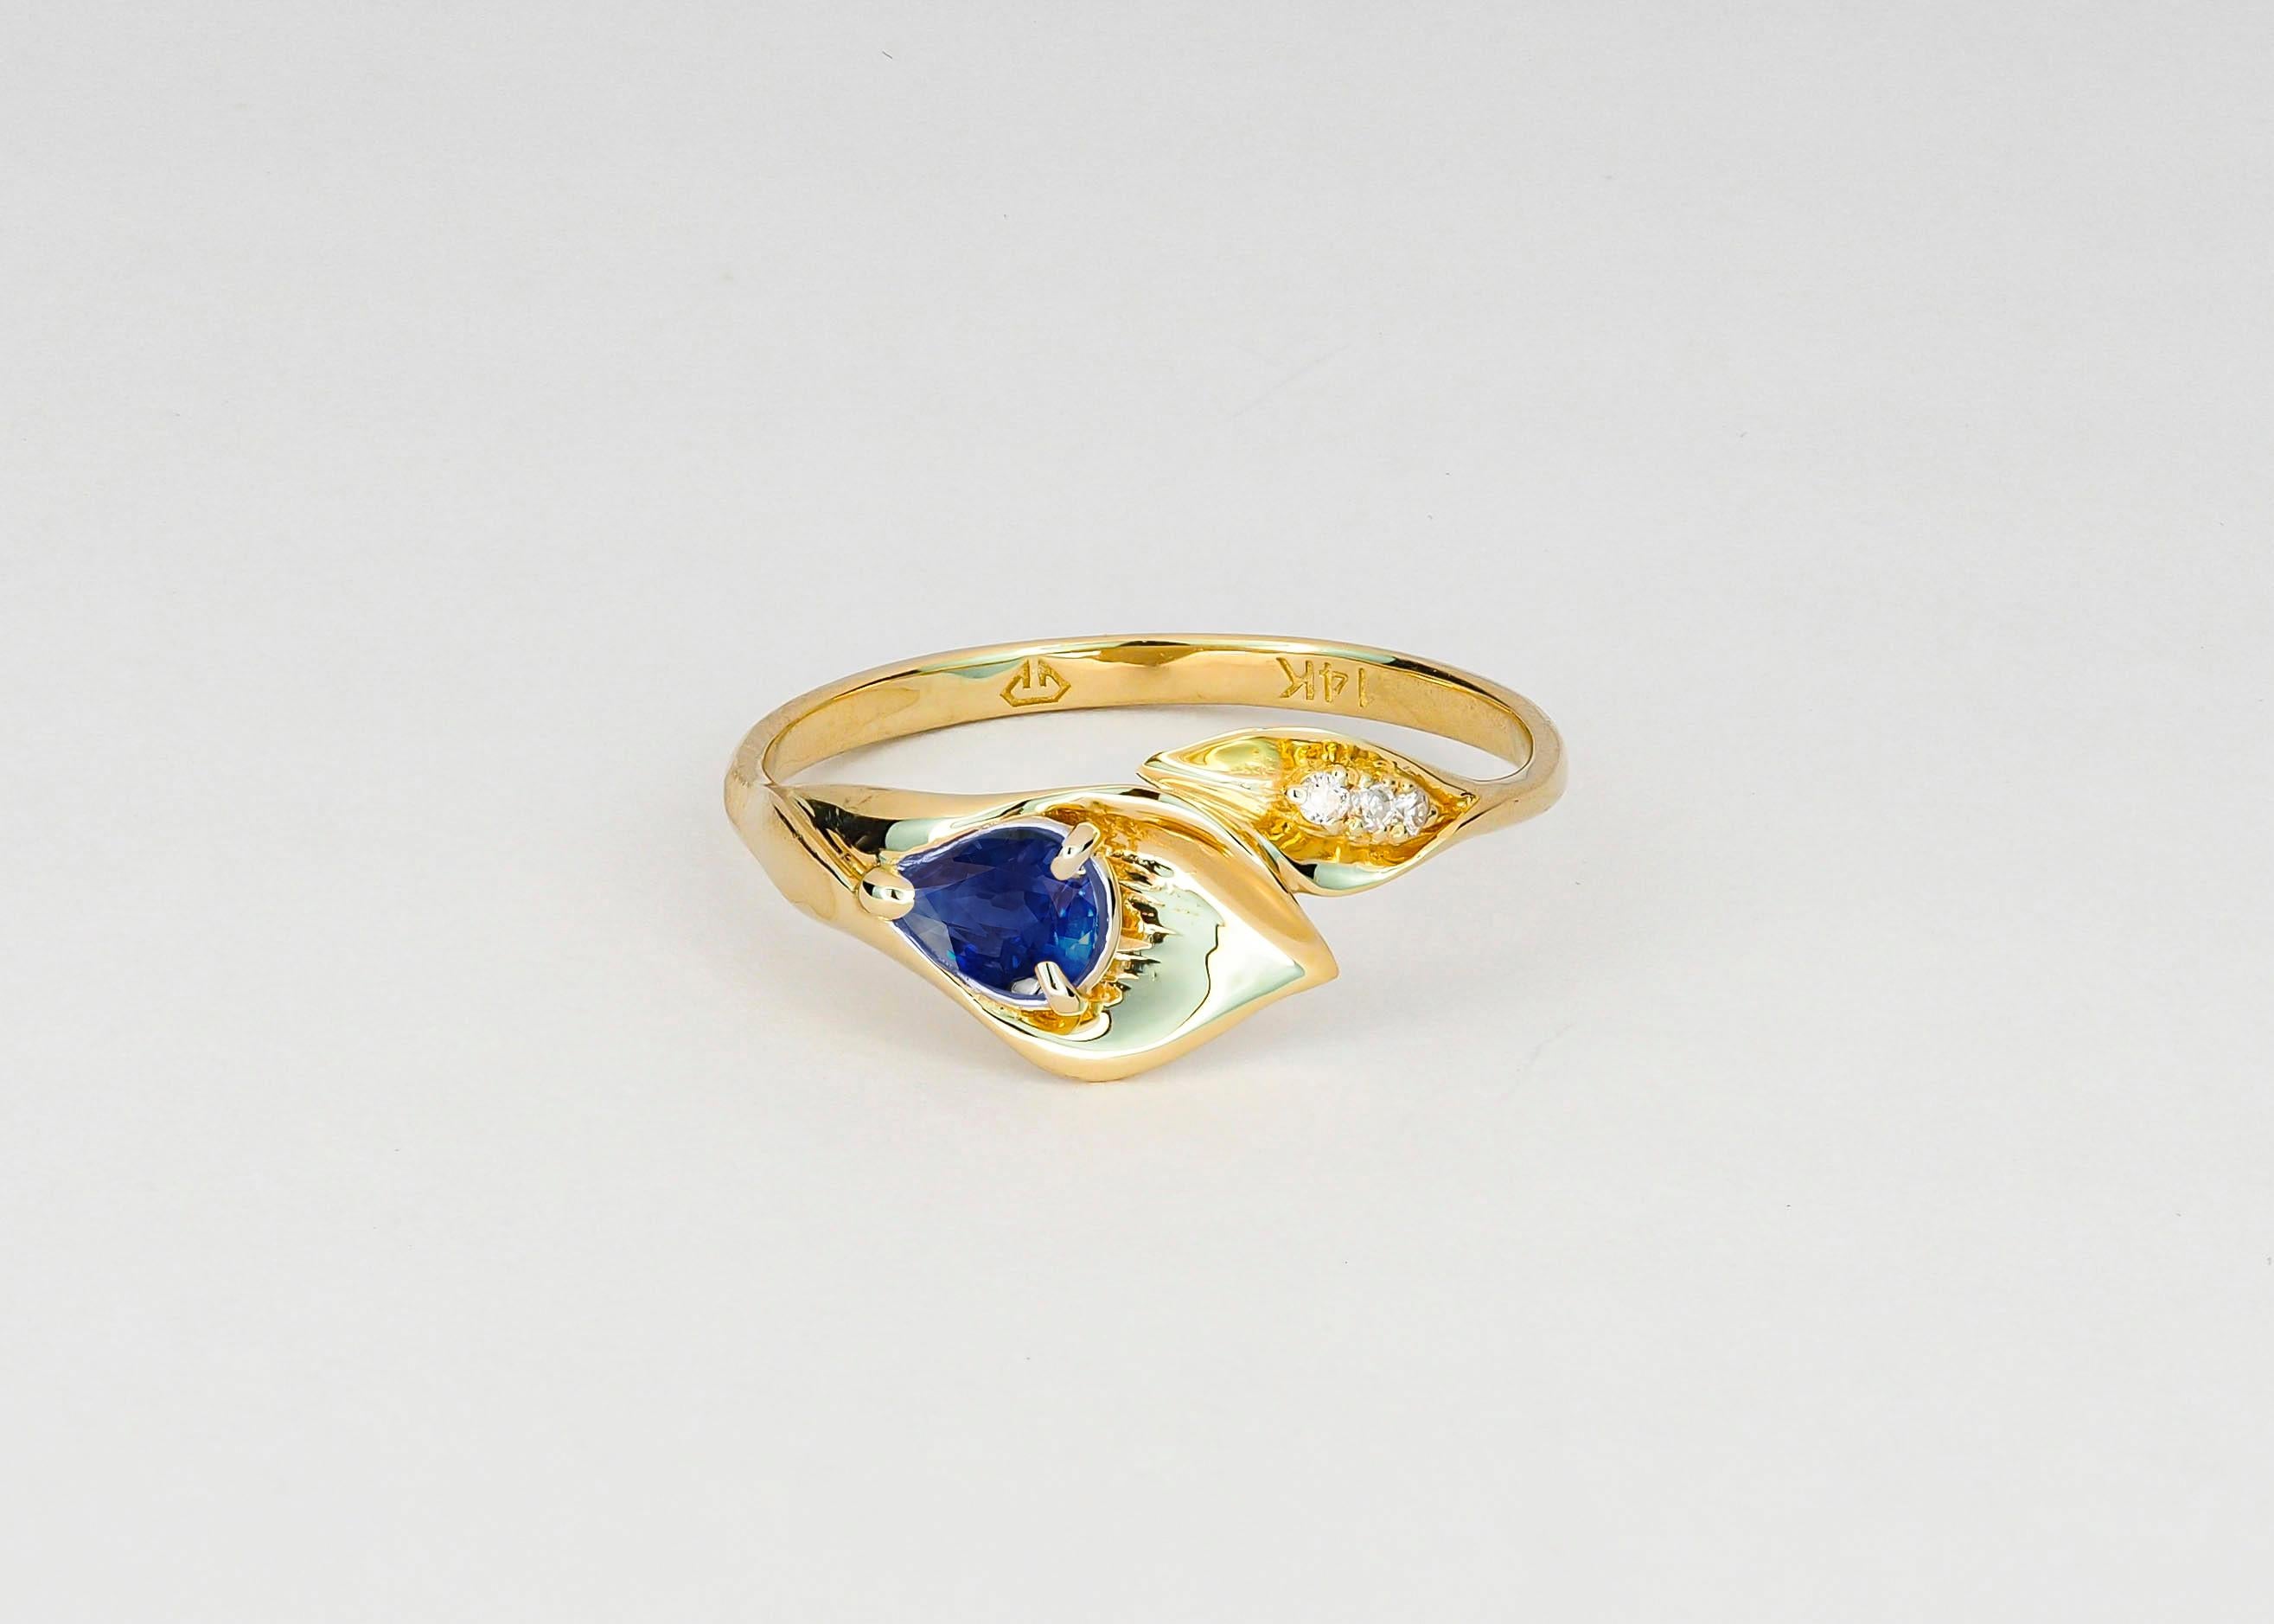 Modern Lily Calla Gold Ring, 14 Karat Gold Ring with Sapphire and Diamonds